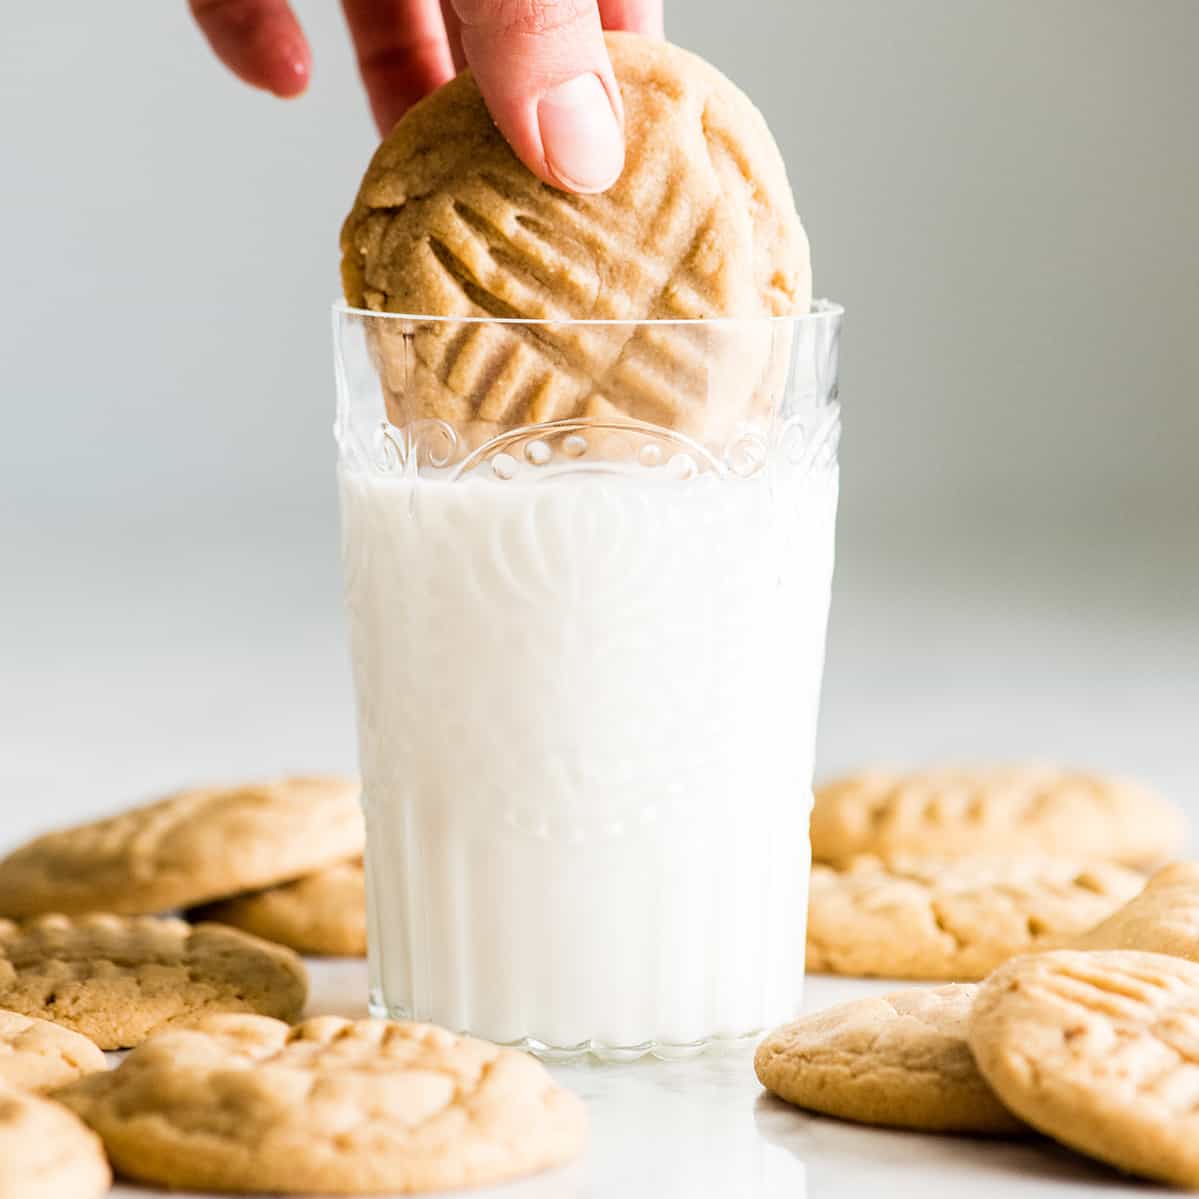 front view of a hand dipping a peanut butter cookie into a glass of milk